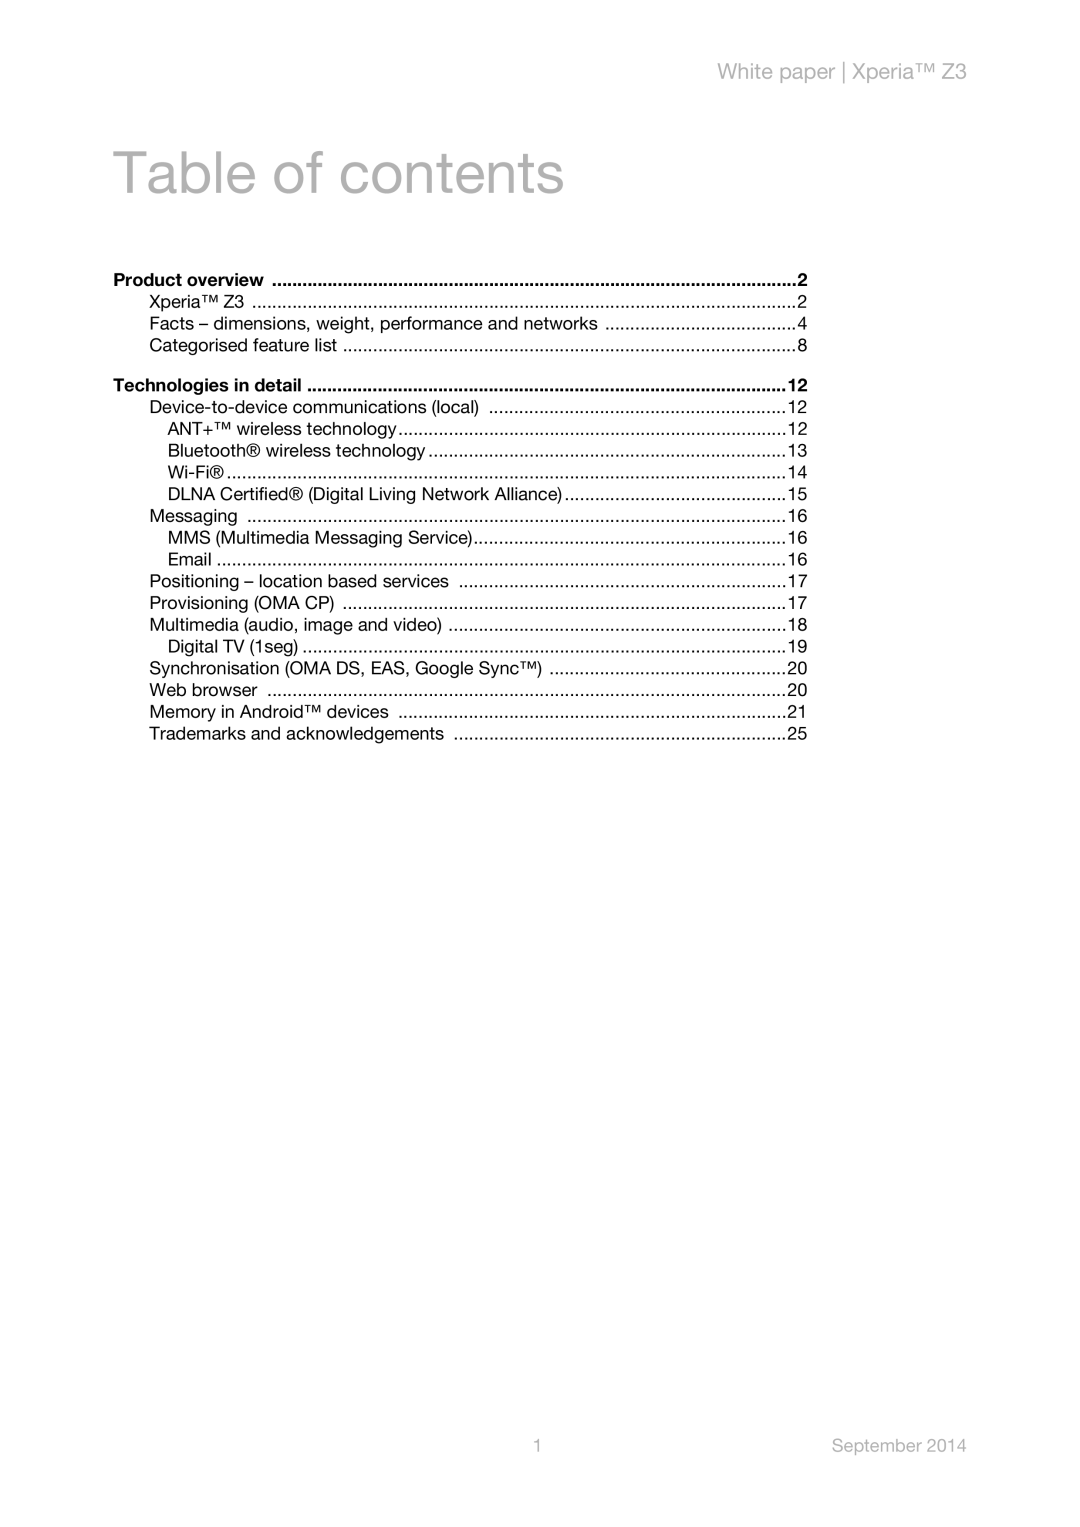 Sony D6603, D6653, D6633, D6616, D6643 manual Table of contents, White paper Xperia Z3, September 